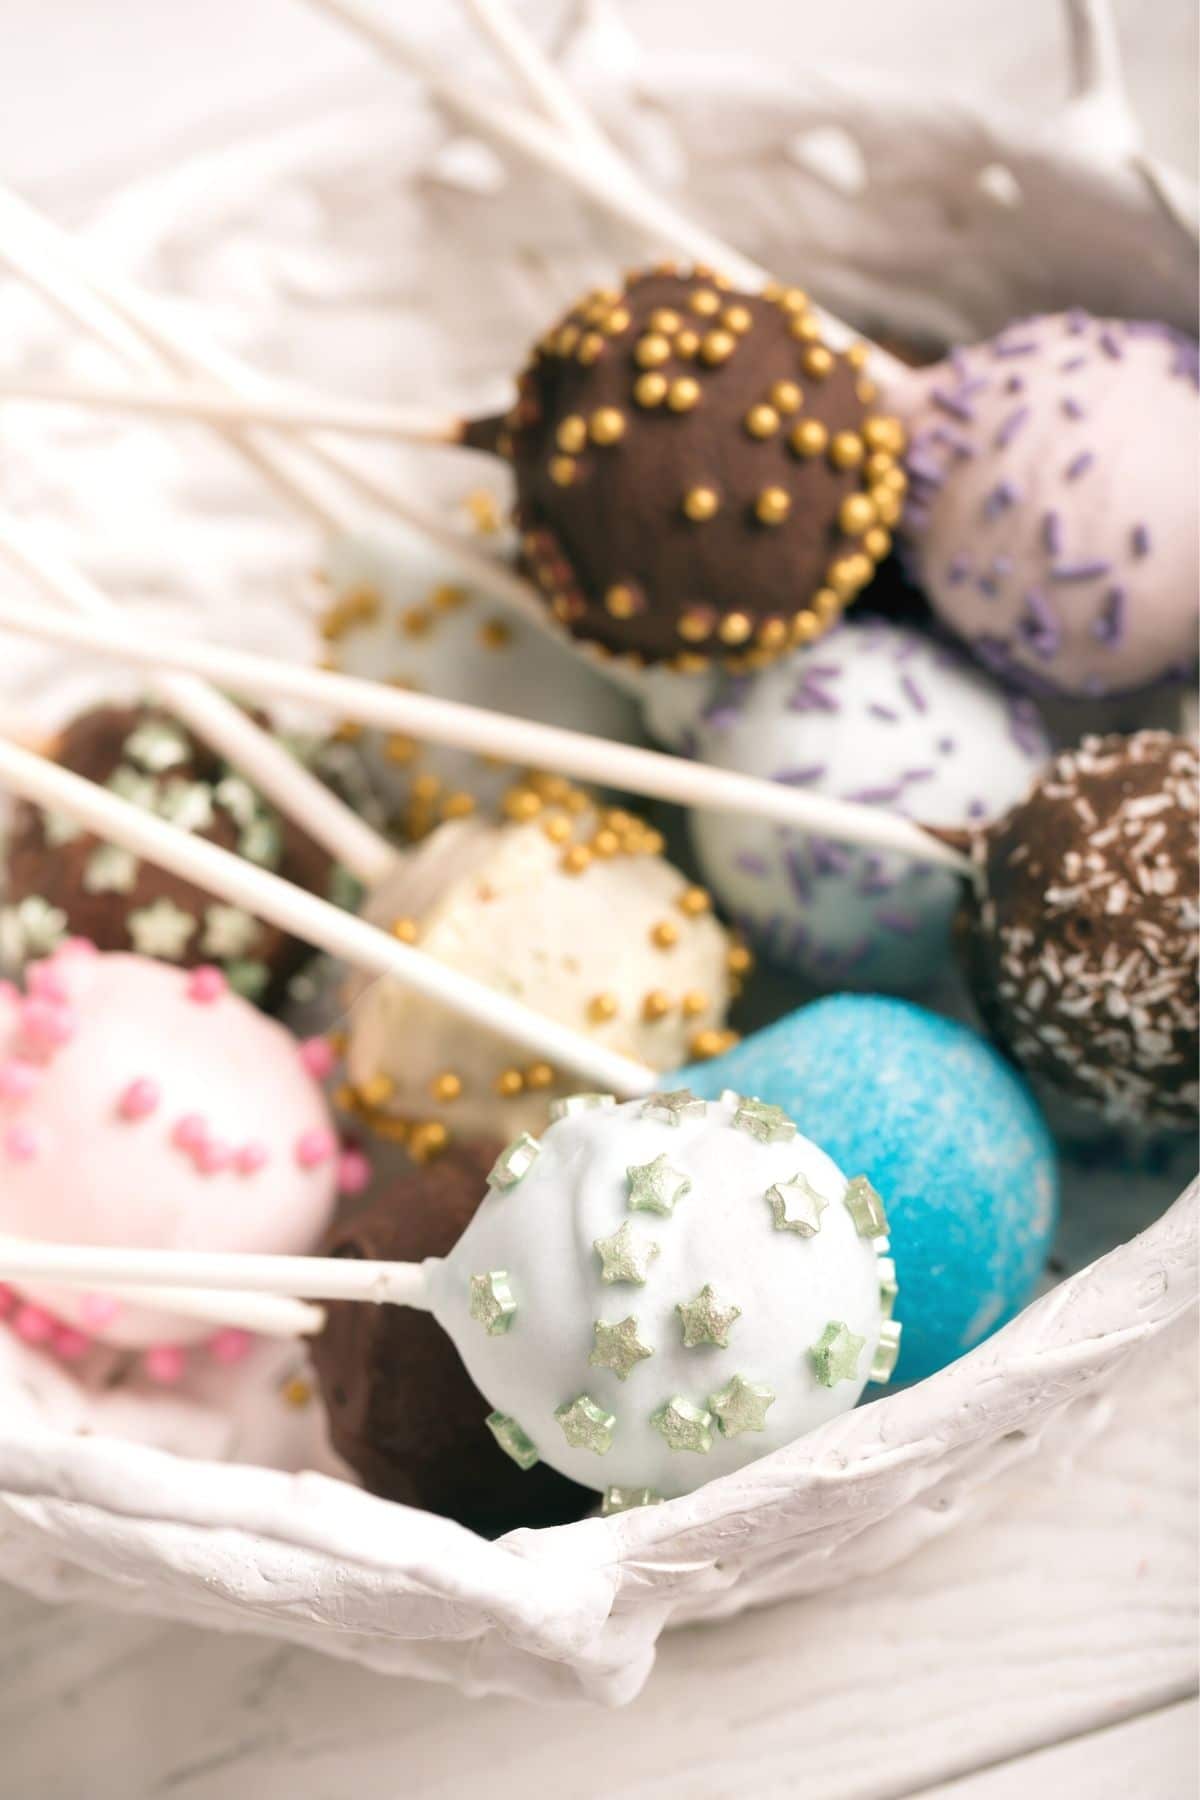 A bunch of cake pops decorated with different sprinkles.